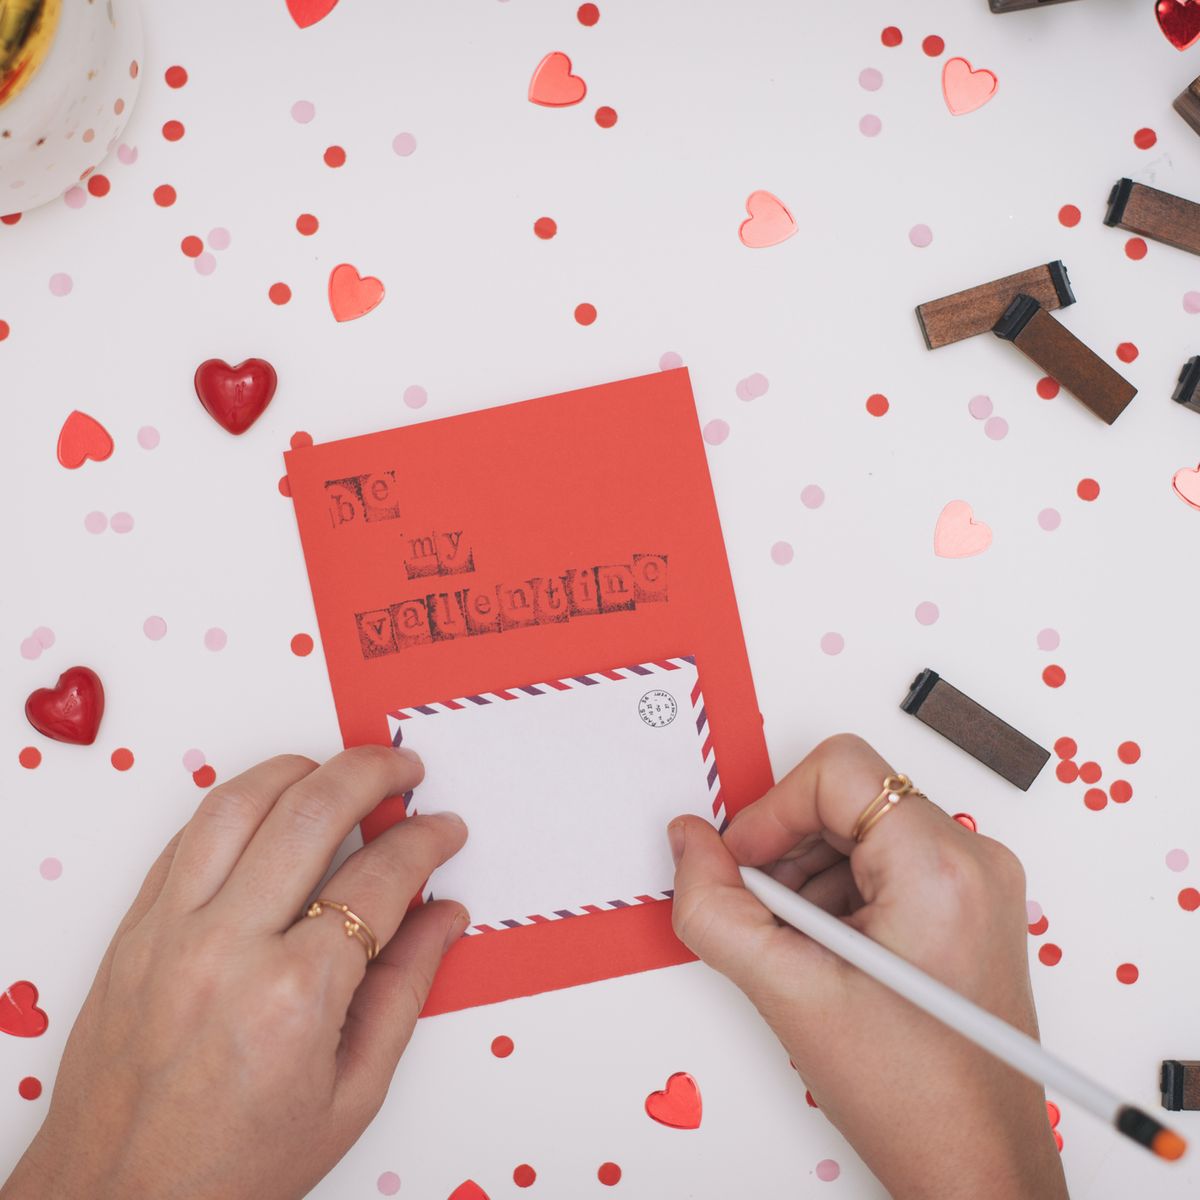 Why You Need to Write Love Letters (& How to Write One)